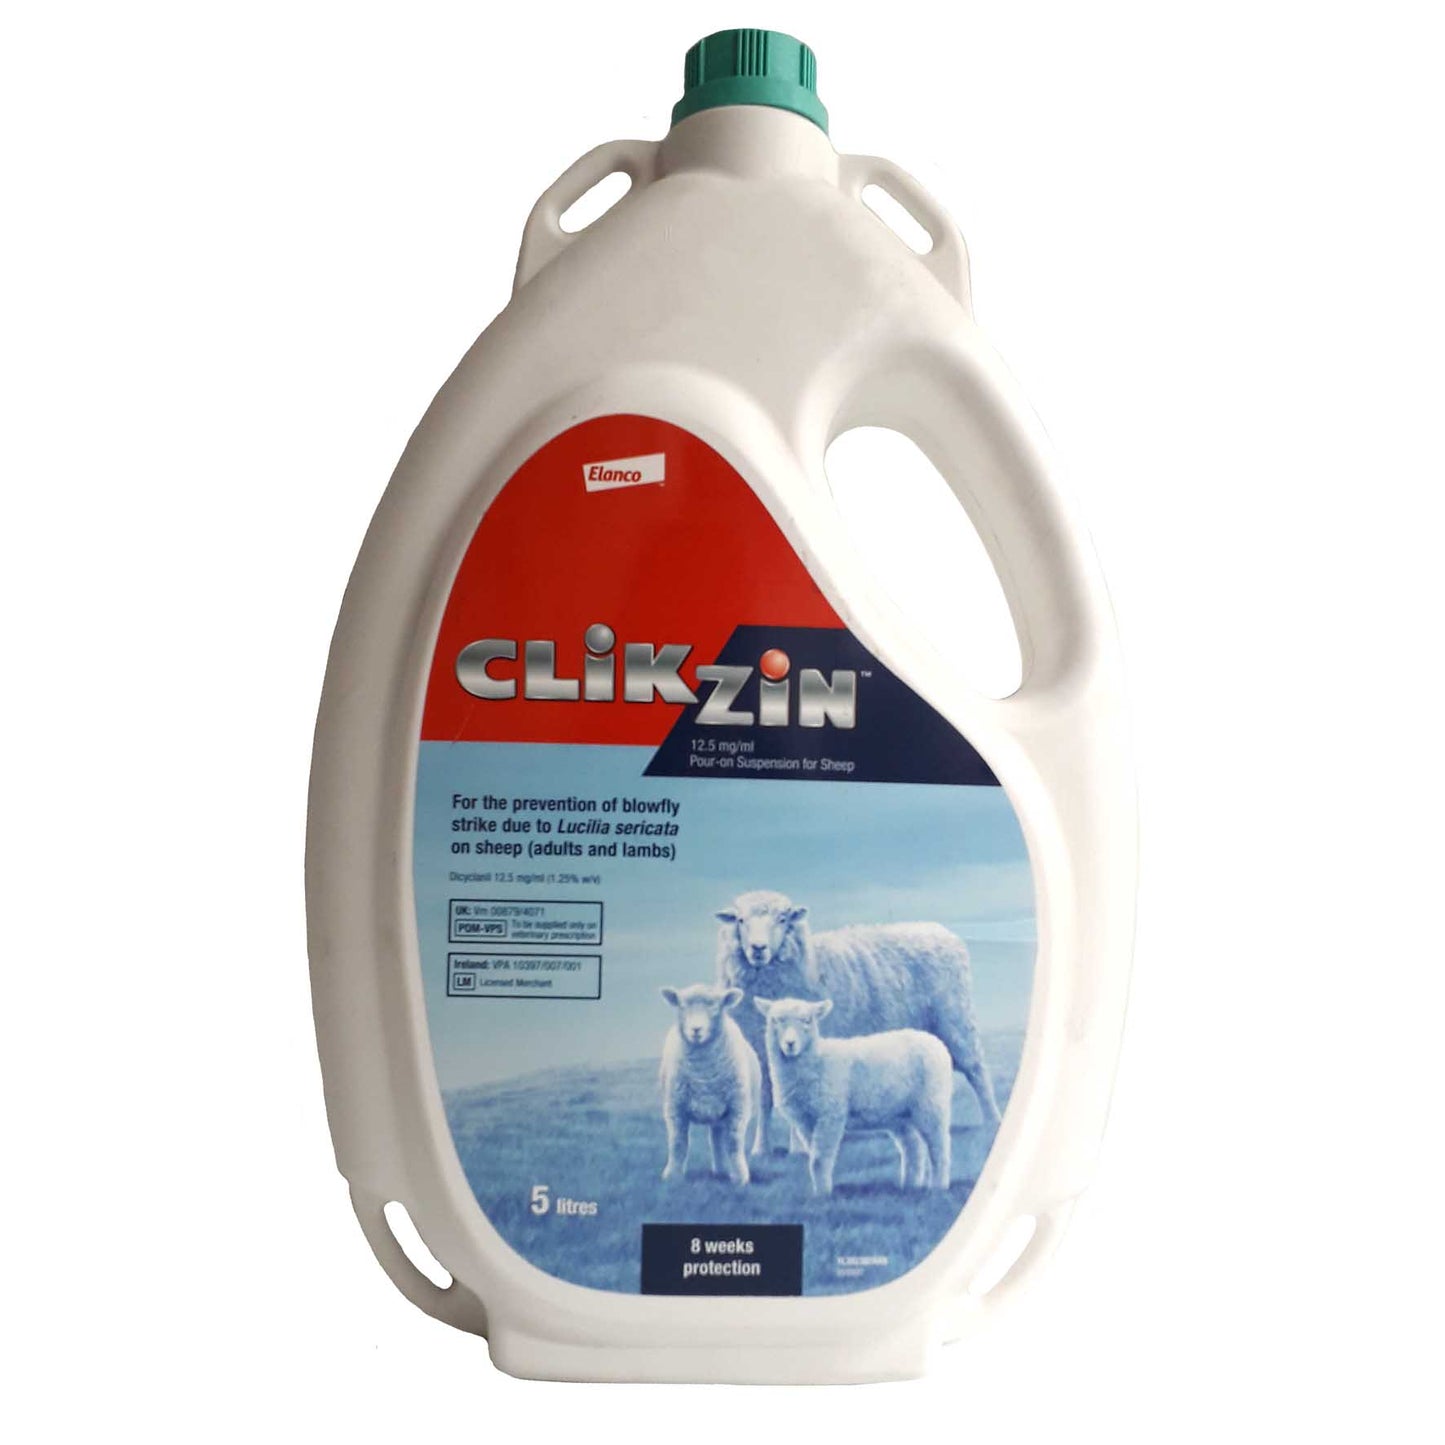 CLiKZiN 12.5 mg/ml Pour-On Suspension for Sheep
